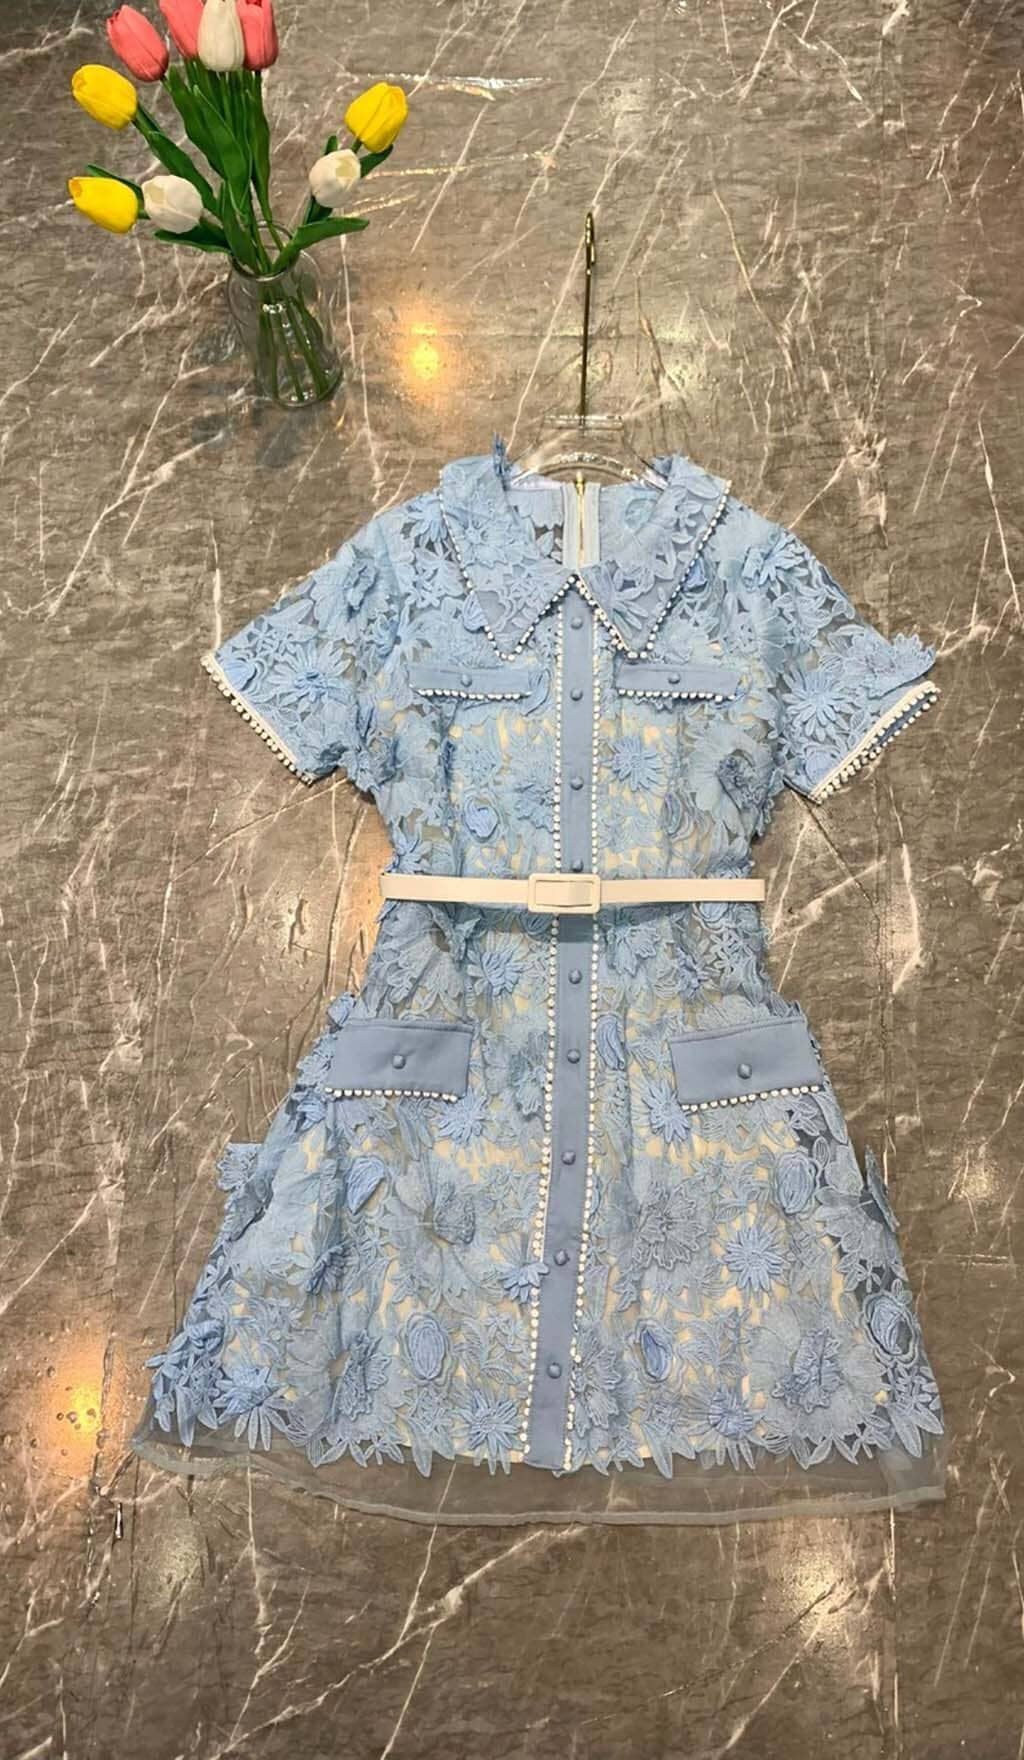 A-LINE FLORAL EMBROIDERY MINI DRESS IN BLUE